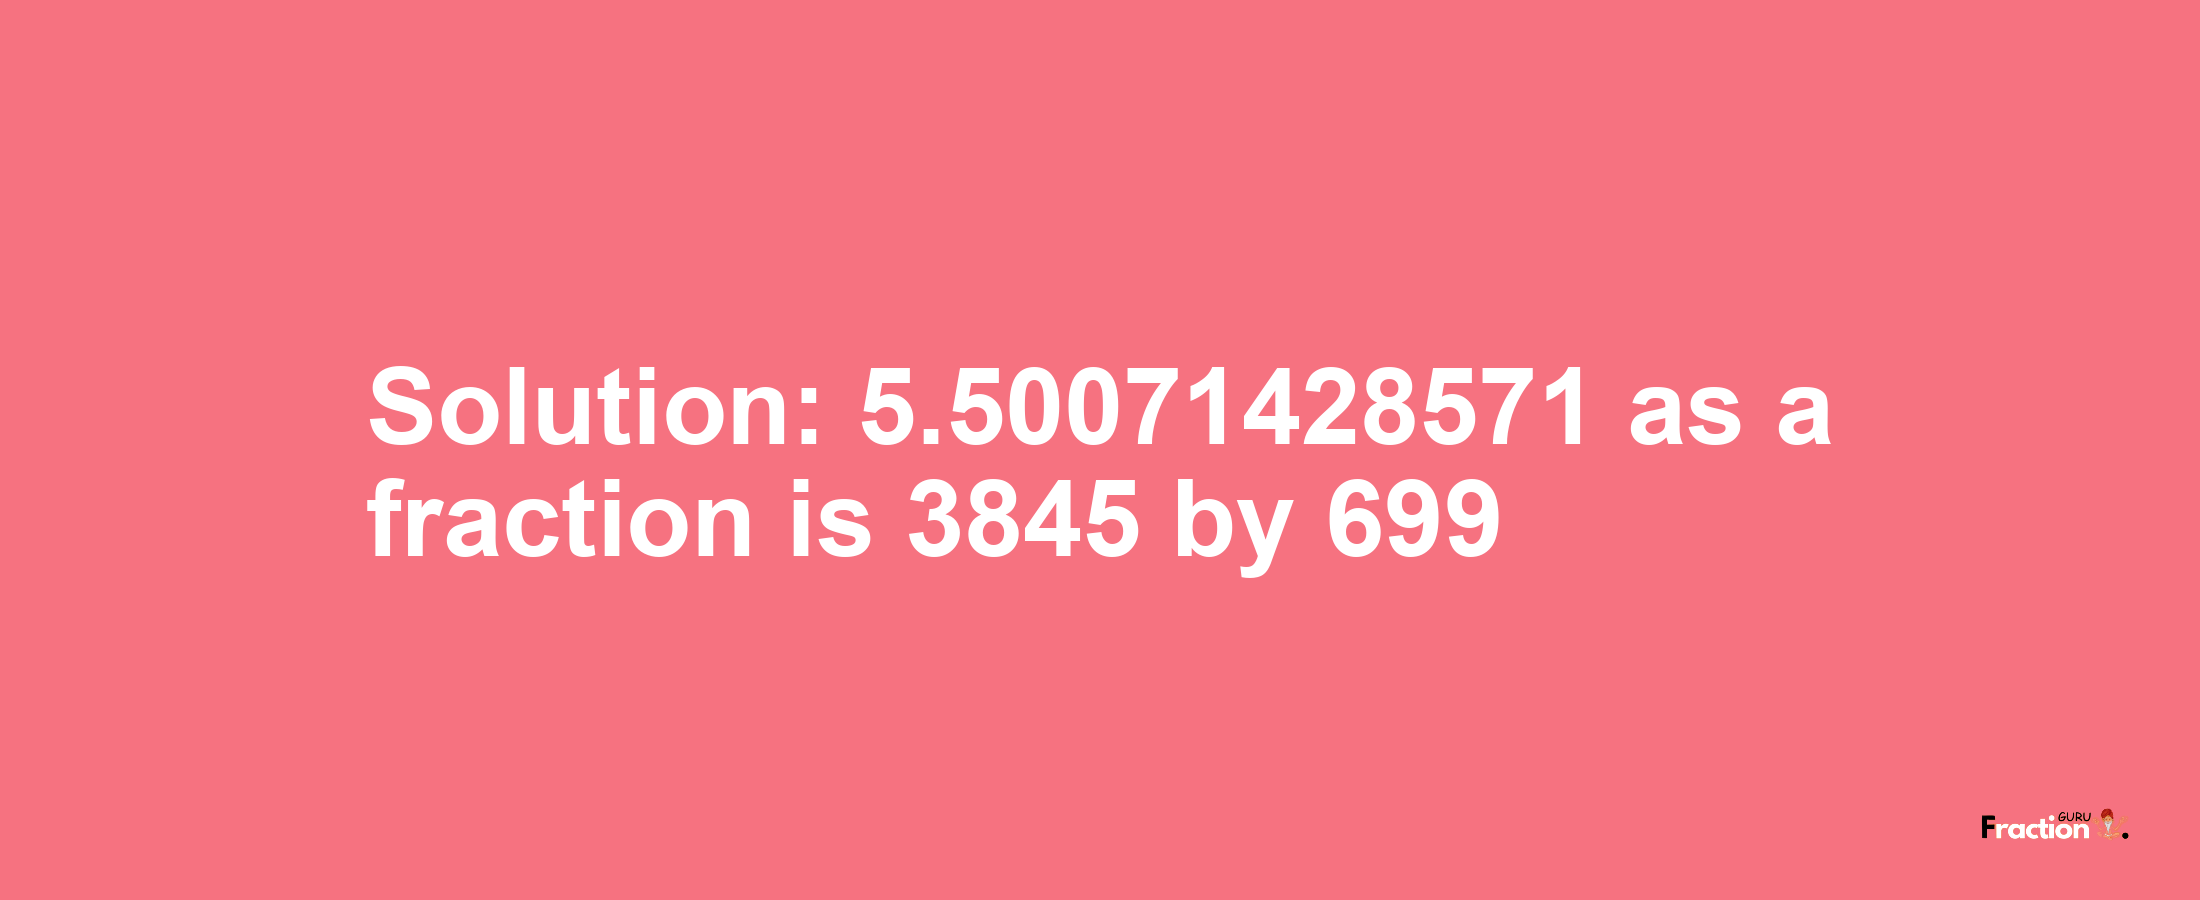 Solution:5.50071428571 as a fraction is 3845/699